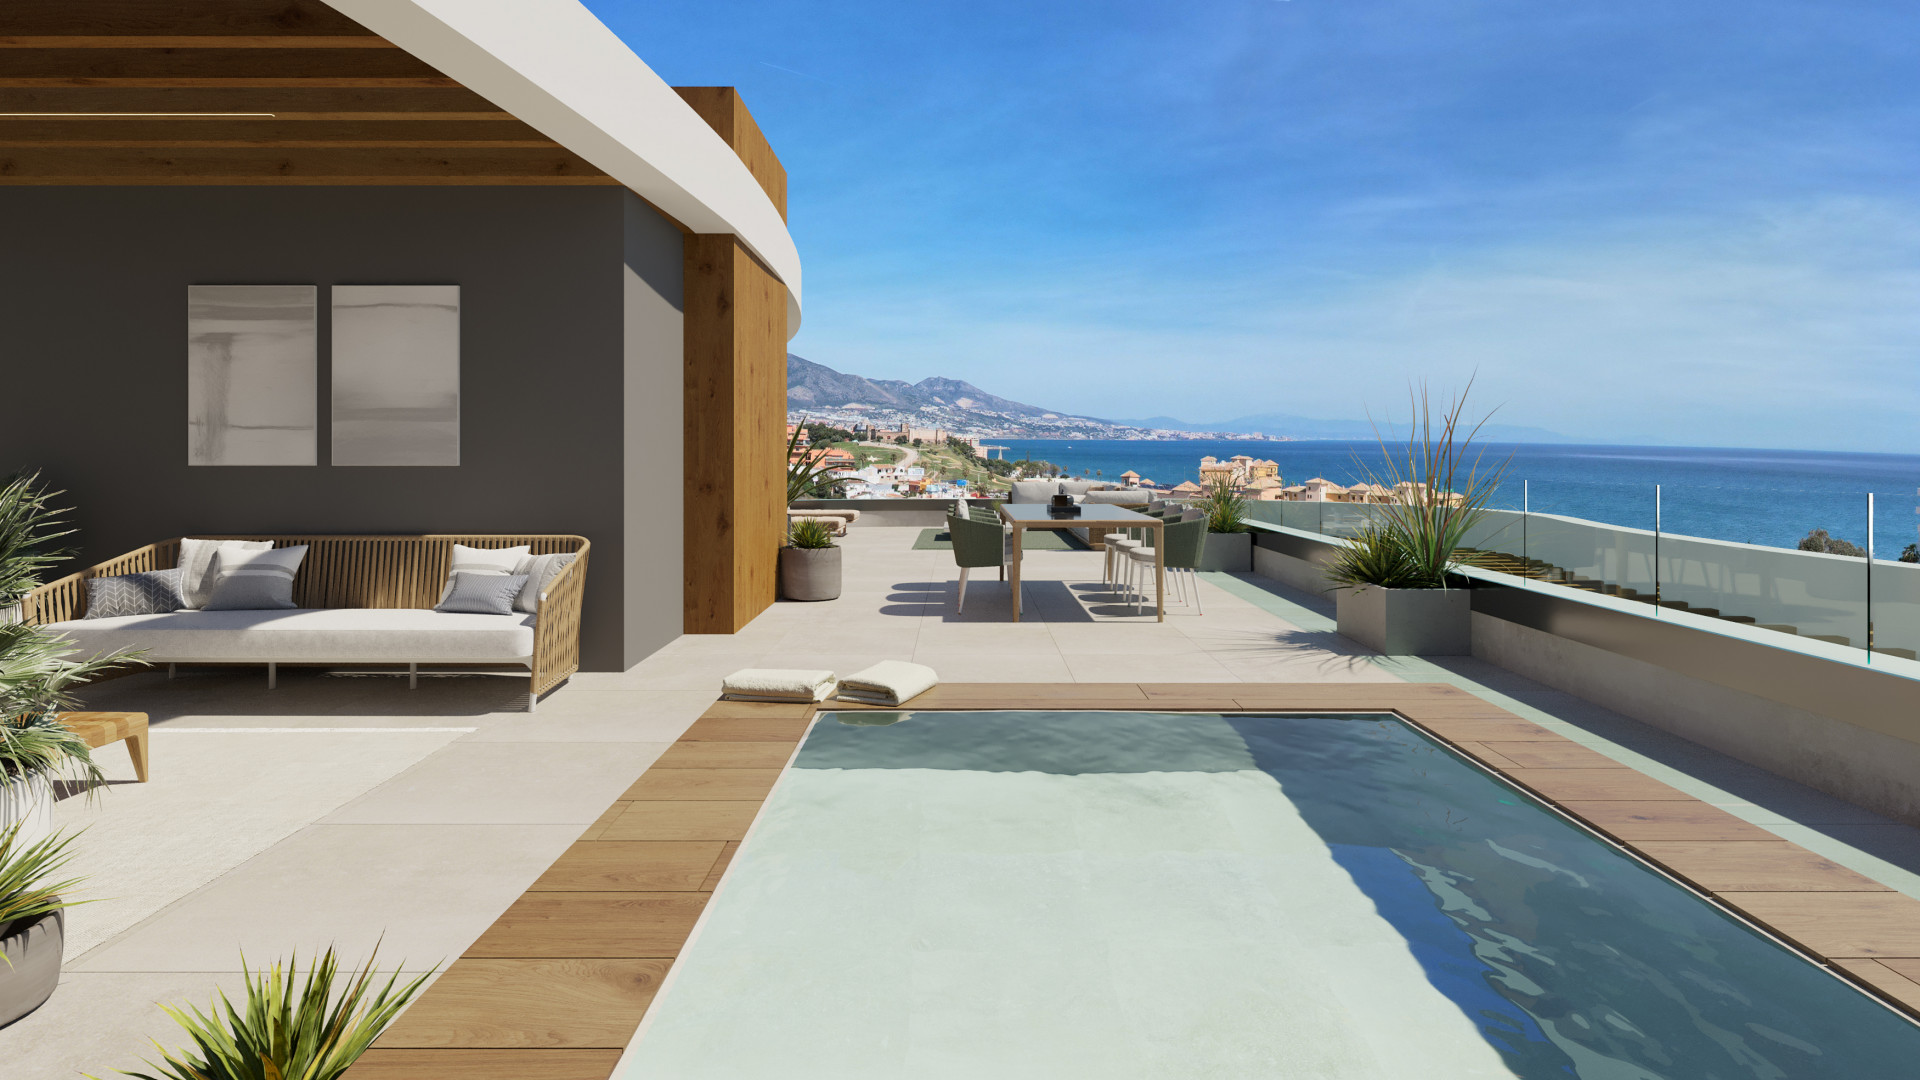 Elysea Suites: New residential project comprising 22 homes located in the Mijas Costa area. | Image 2